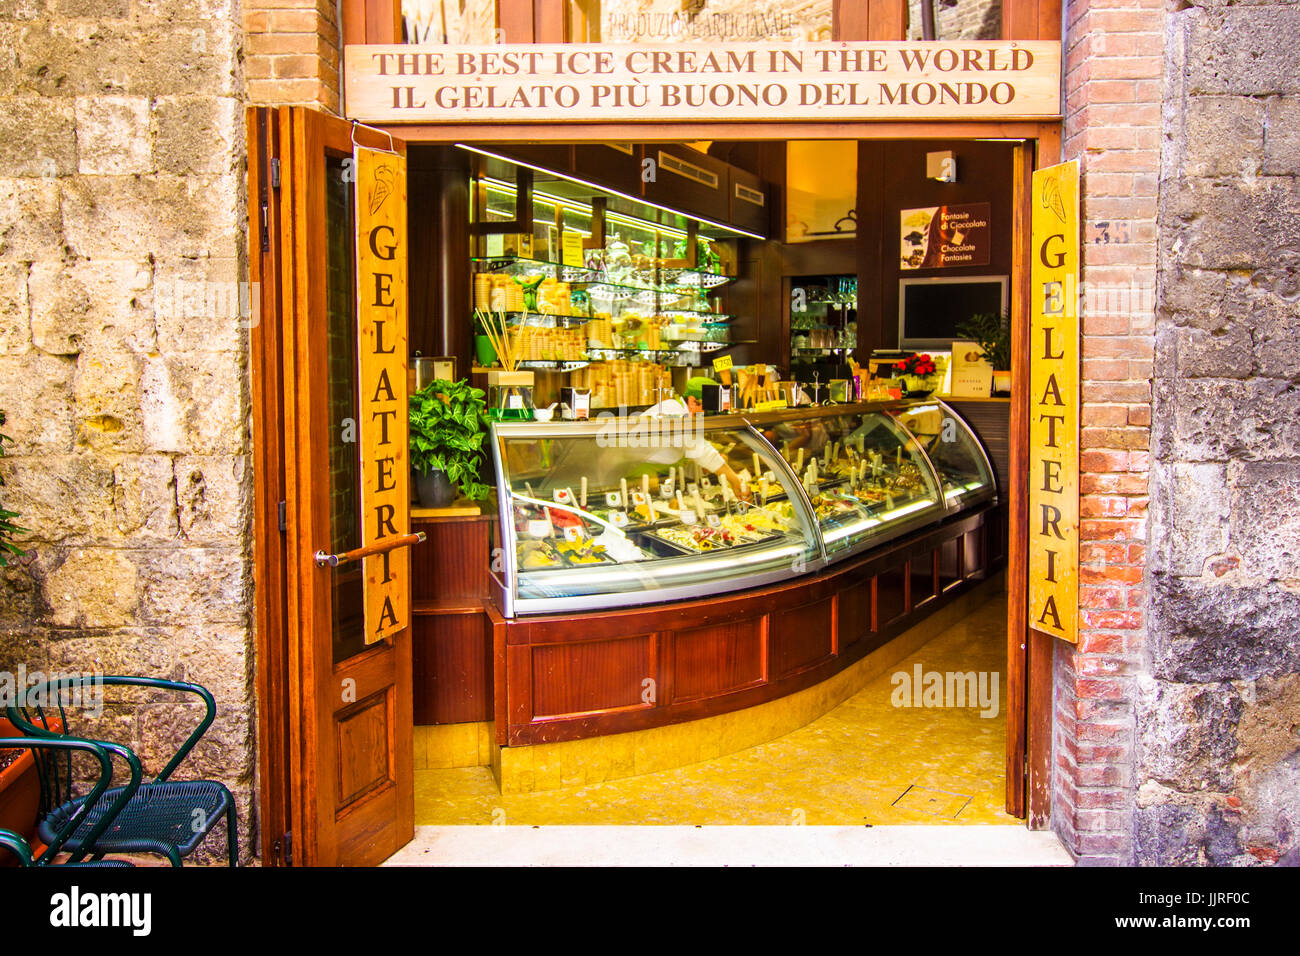 The best gelato in the world from an ice cream shop in San Gimignano Tuscany, Italy Stock Photo